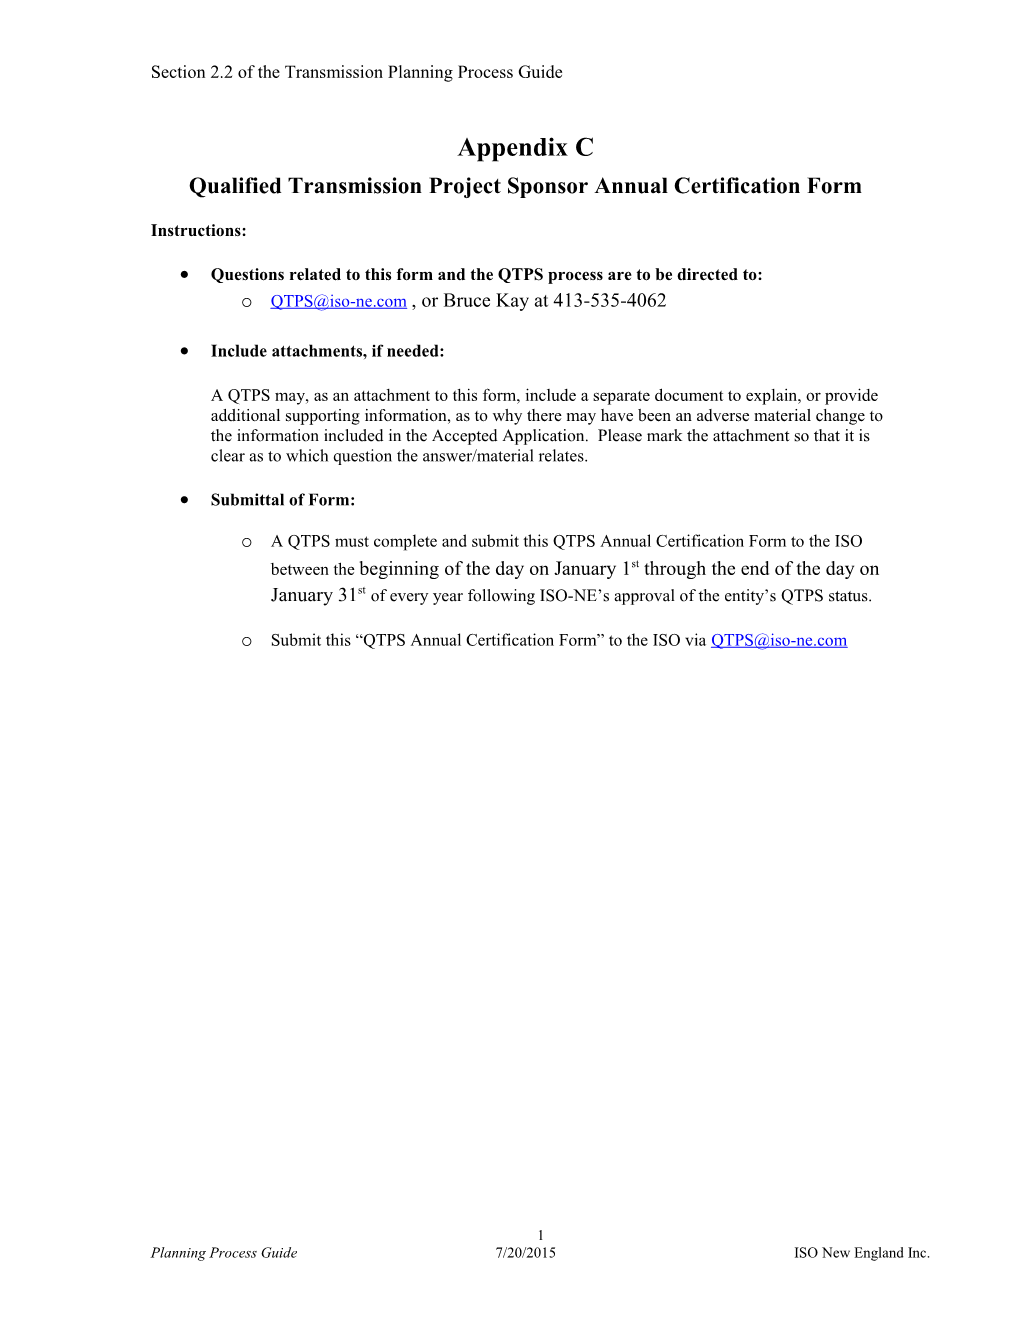 Qualified Transmission Project Sponsor Annual Certification Form